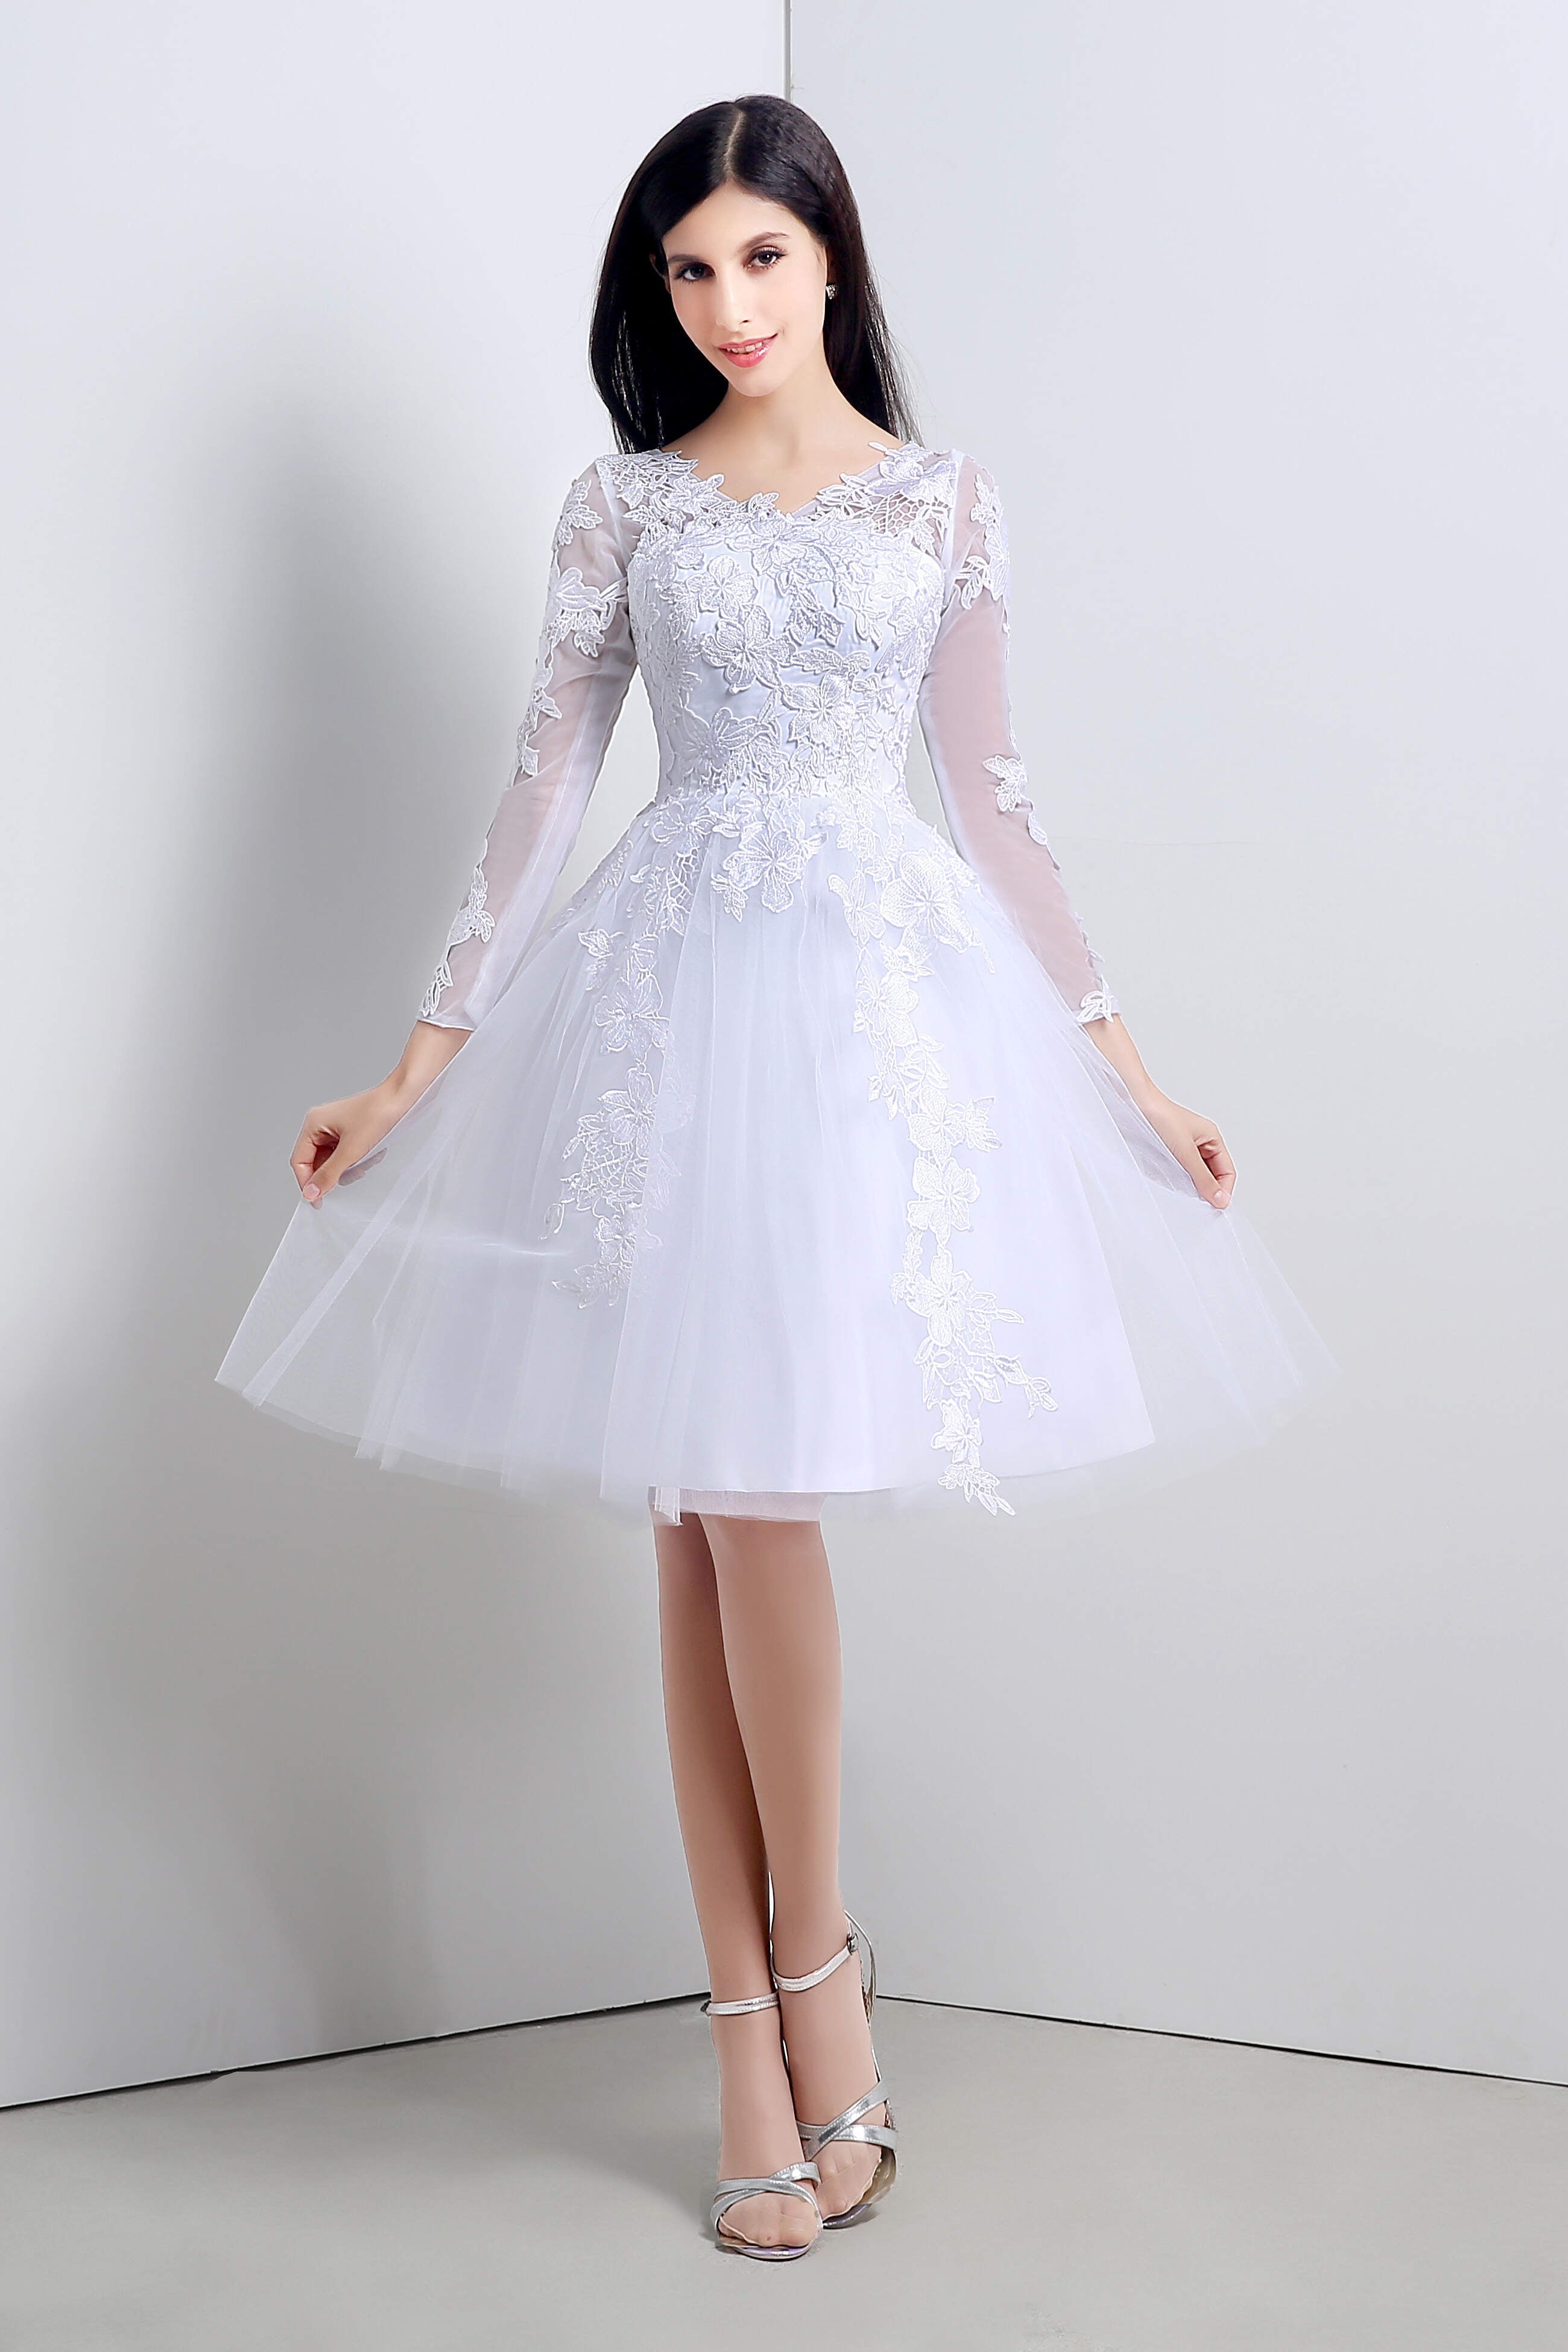 A-Line White Tulle Appliques Long Sleeve Corset Homecoming Dresses outfit, Party Fitness